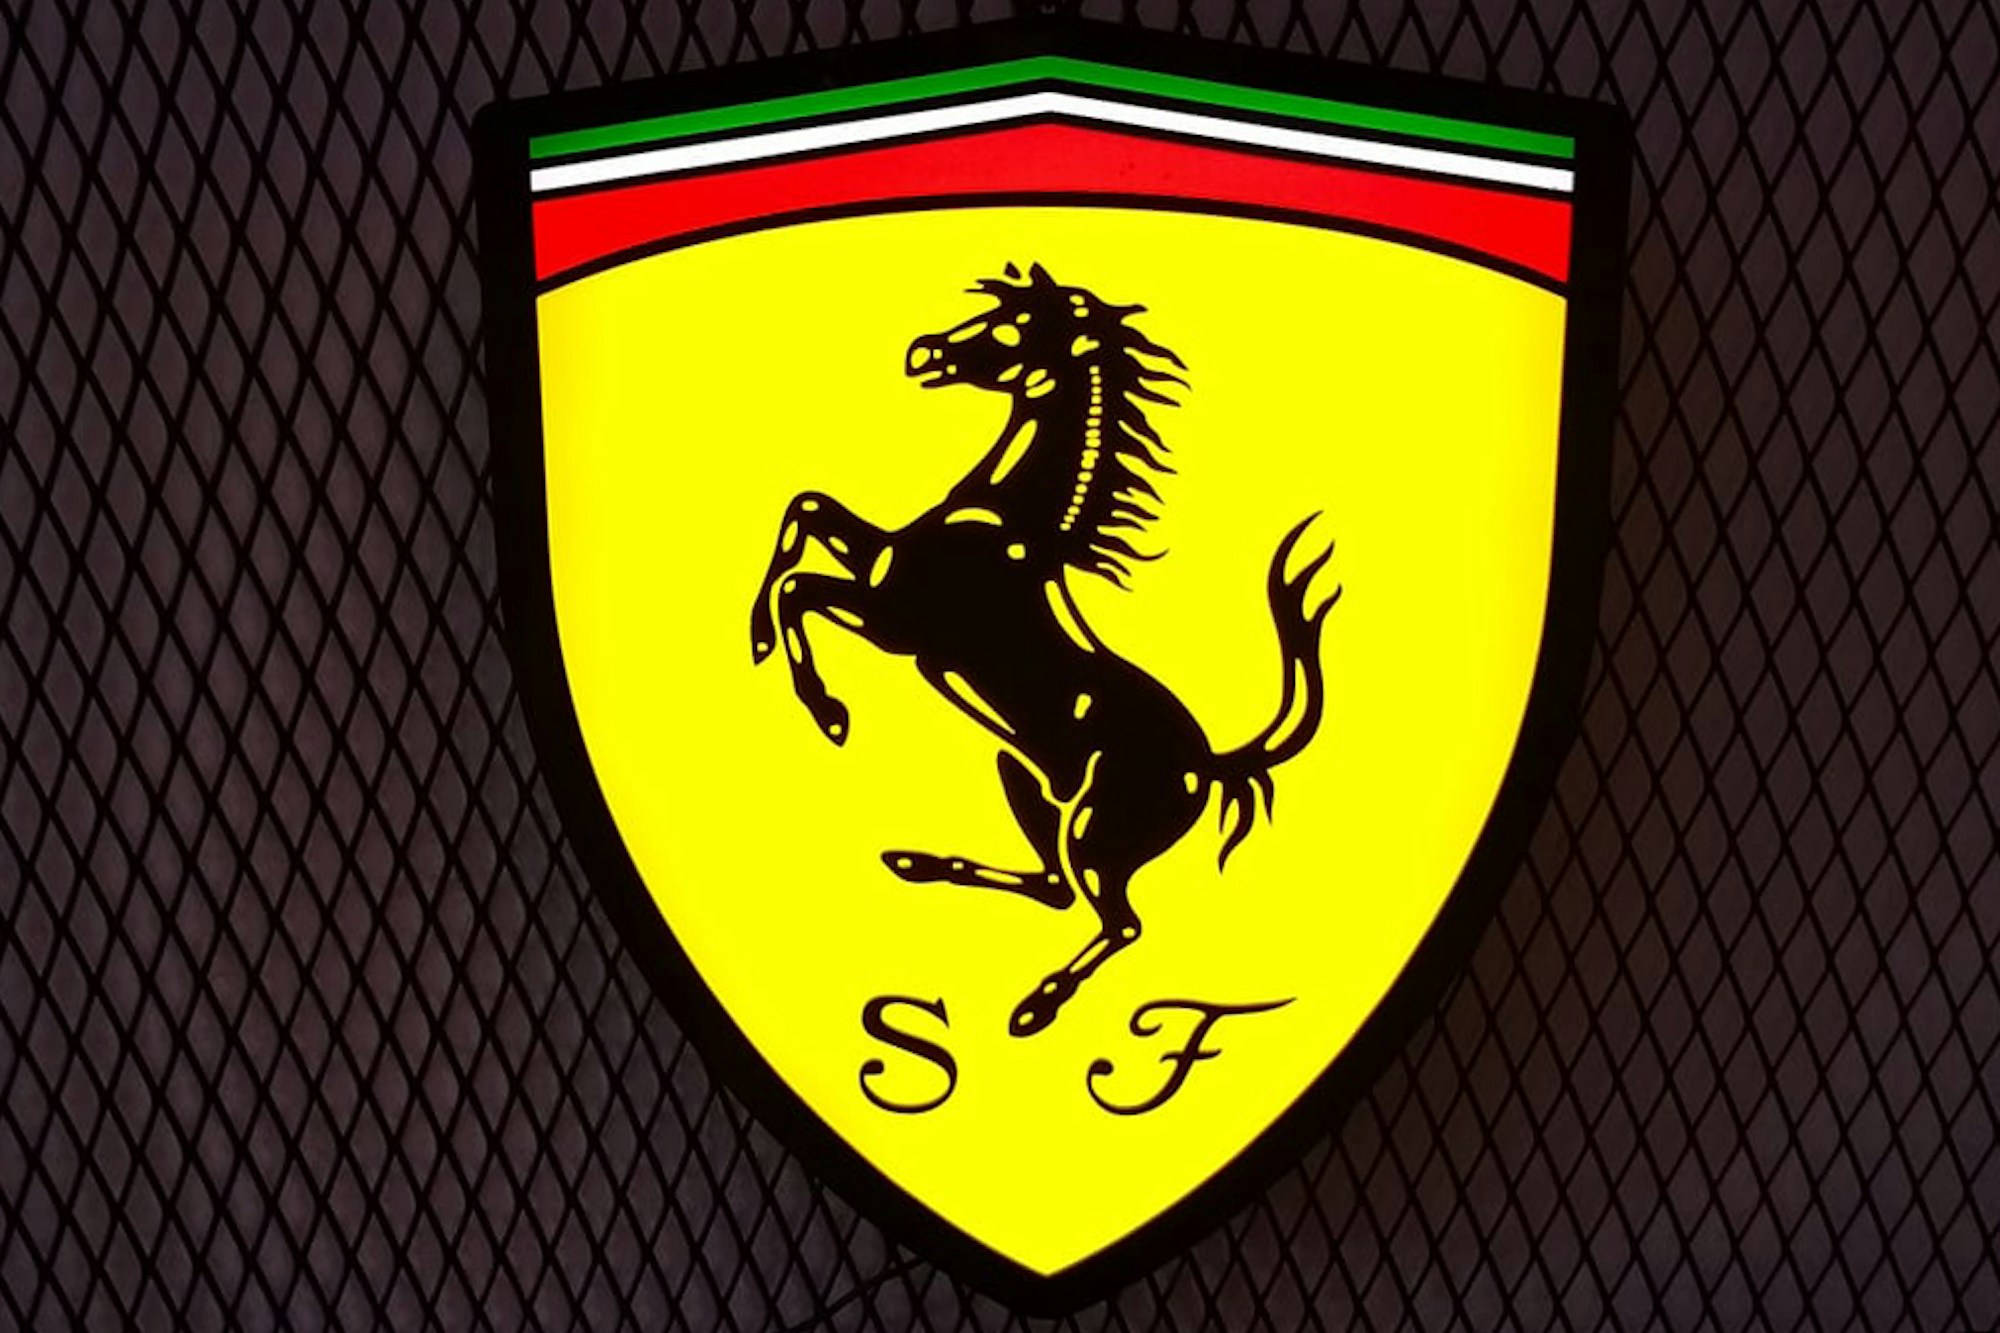 FERRARI ILLUMINATED SHIELD SIGN for sale by auction in Istanbul